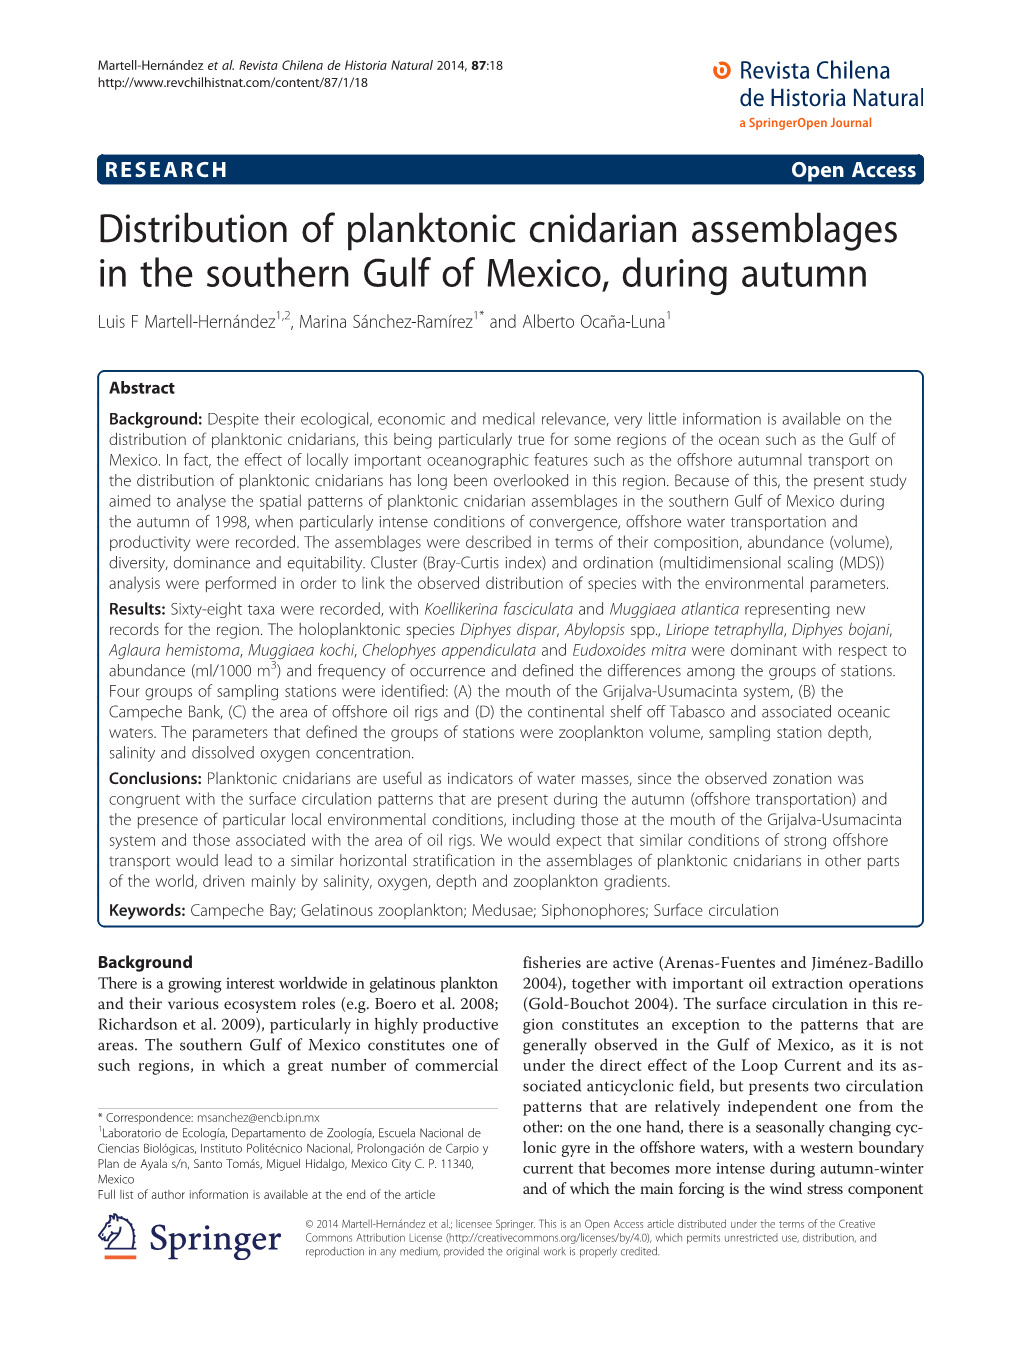 Distribution of Planktonic Cnidarian Assemblages in the Southern Gulf of Mexico, During Autumn